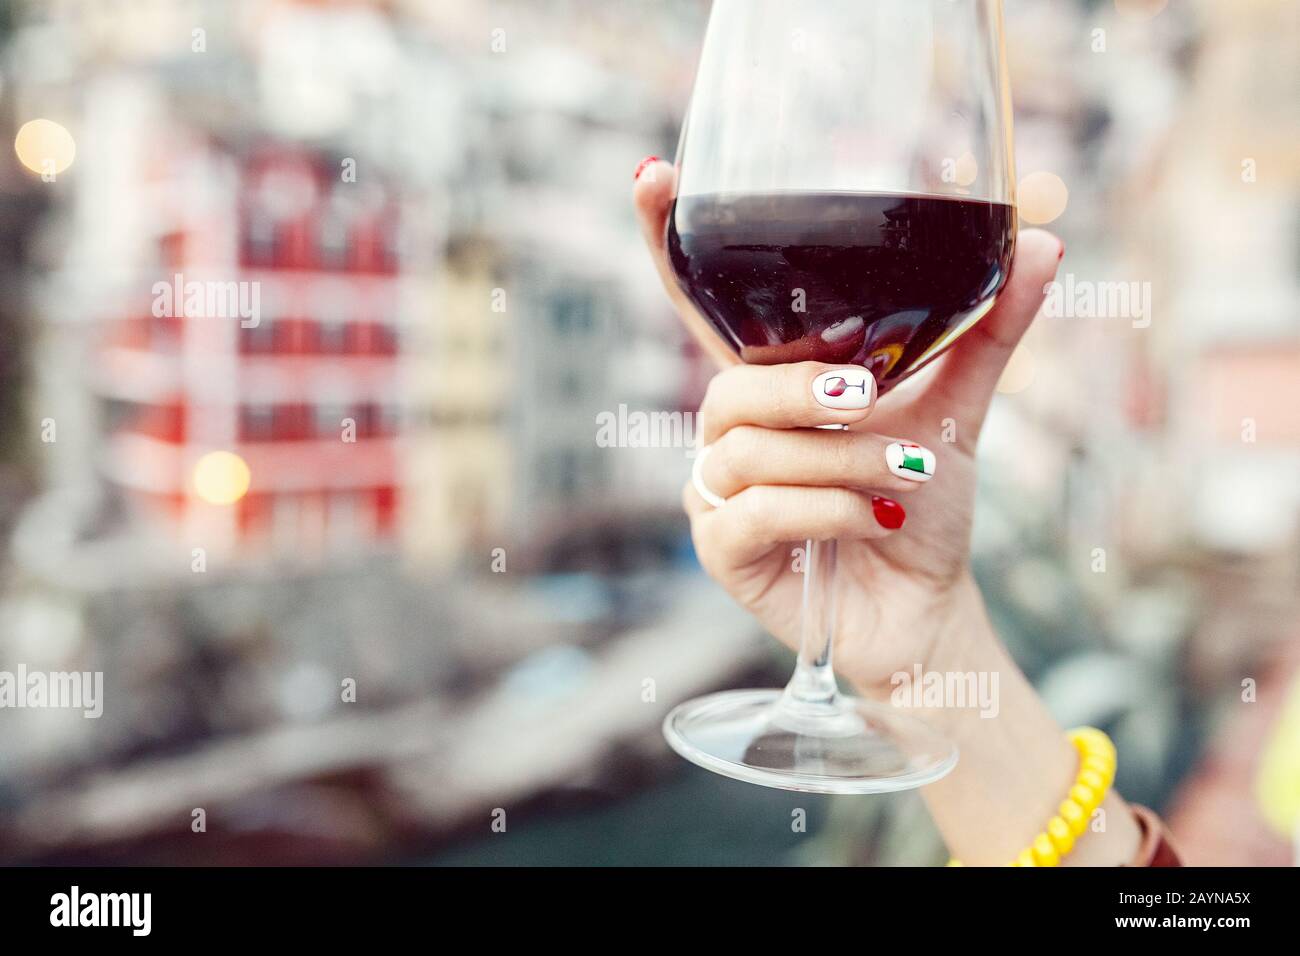 Female hand with italian flag nail art holding glass with red wine on a background of cinque terre riomaggiore town Stock Photo